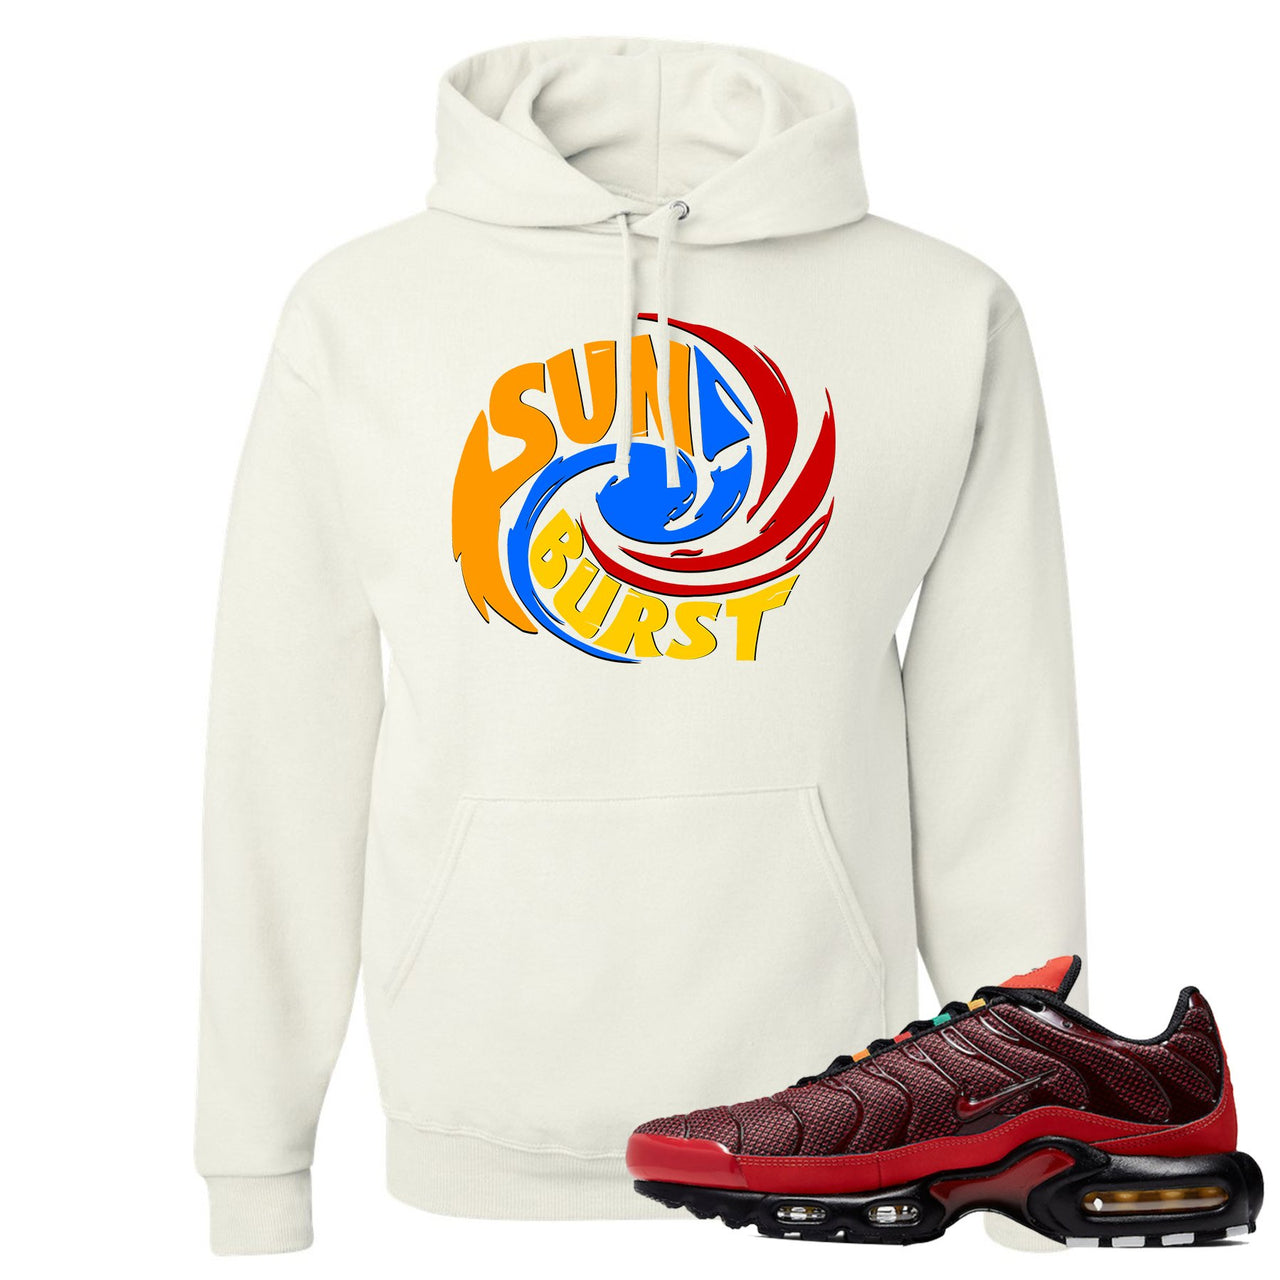 printed on the front of the air max plus sunburst sneaker matching white pullover hoodie is the sunburst hurricane logo